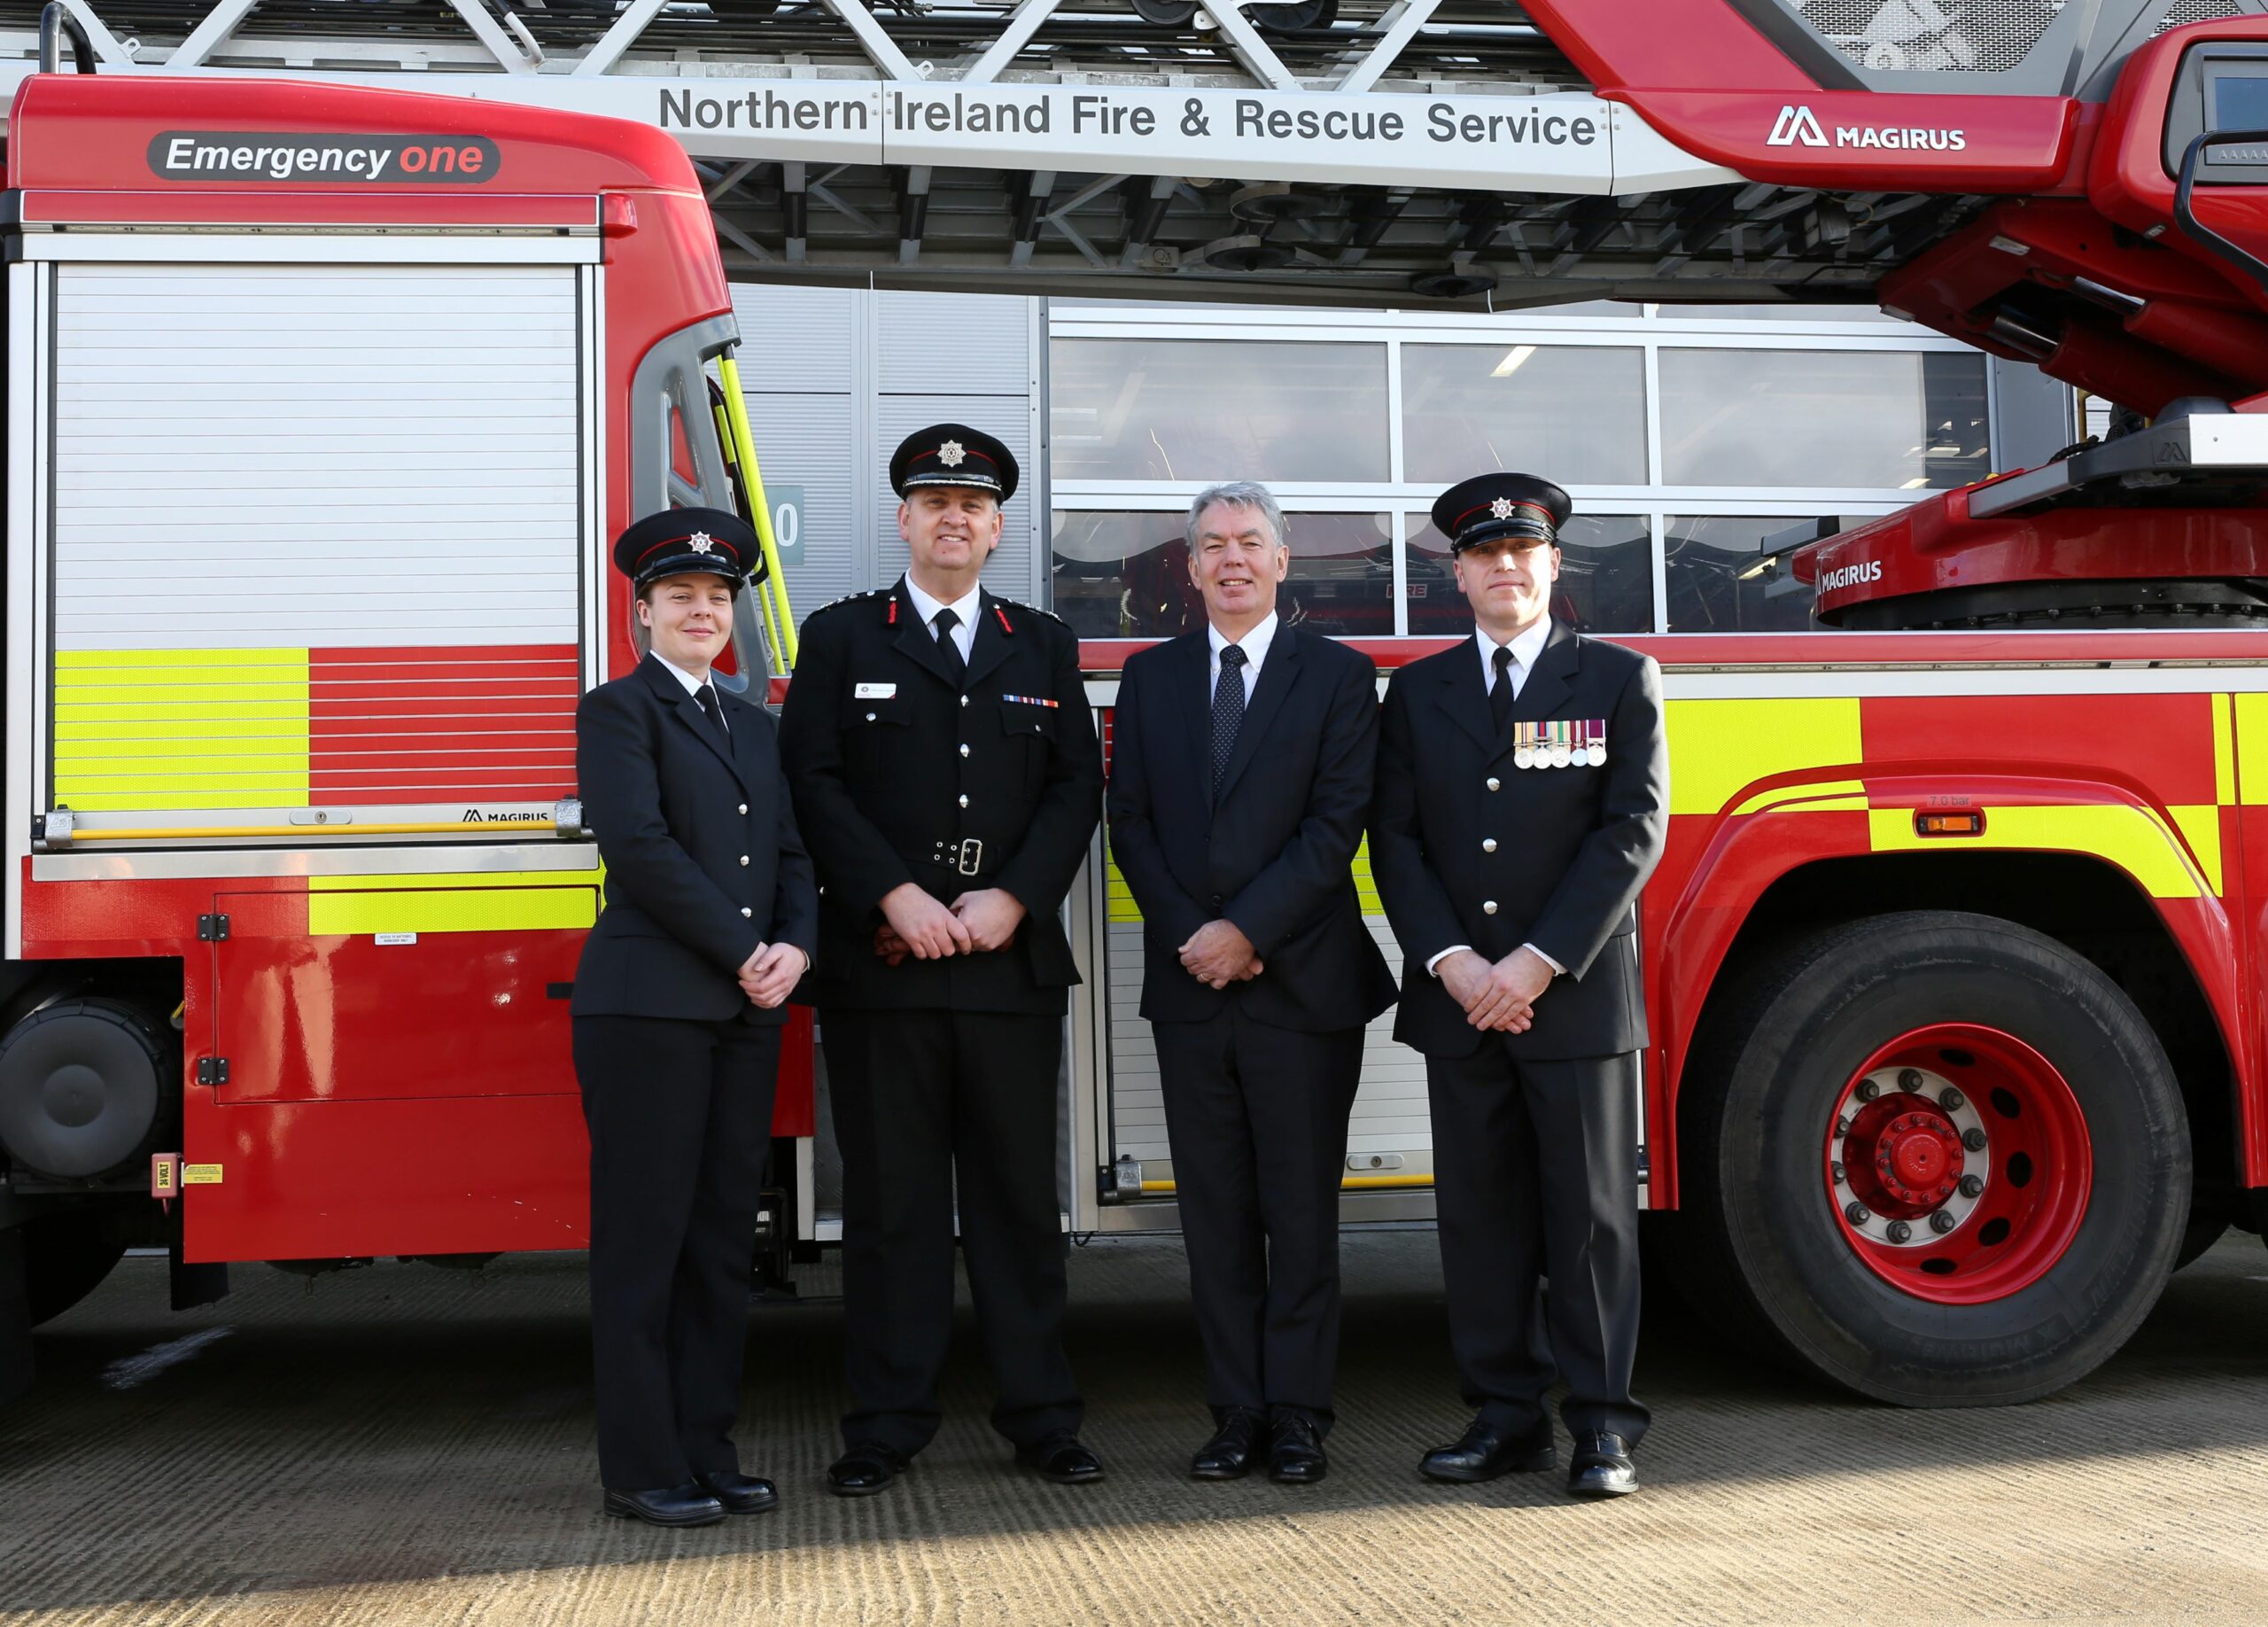 Standing left to right Firefighter Hannah Tucker; NIFRS Chief Fire & Rescue Officer, Aidan Jennings; NIFRS Chairperson, Jay Colville; and Firefighter Alastair Bowler with a Fire Appliance in the background